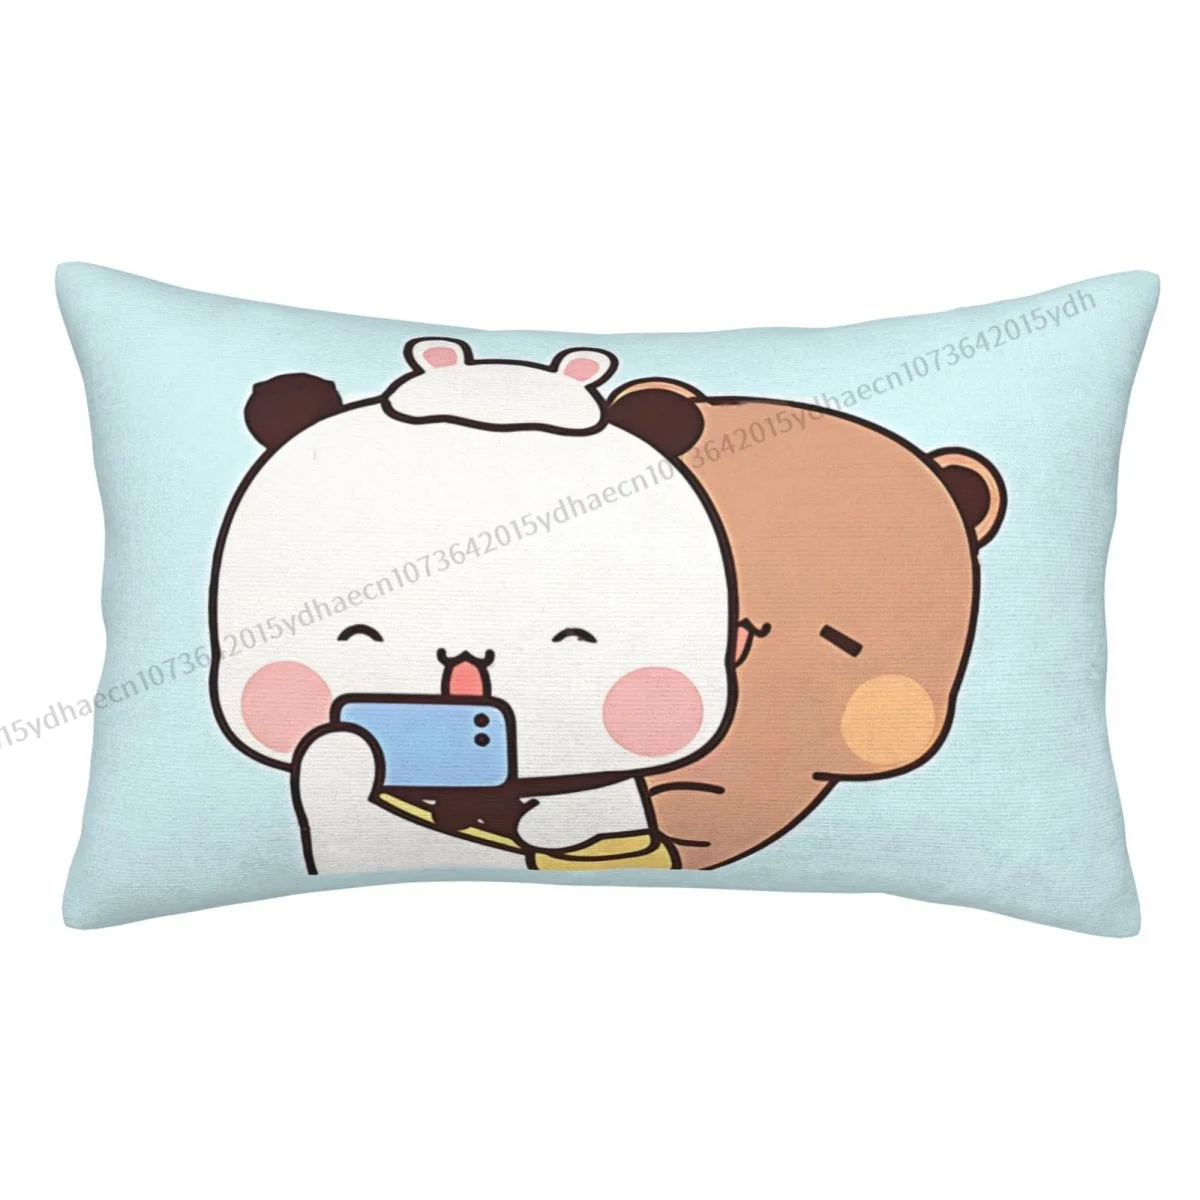 

Taking A Cute Selfie Hug Pillowcase Panda And Brownie Mochi Bear Backpack Cojines Home Printed Office Pillow Covers Decorative